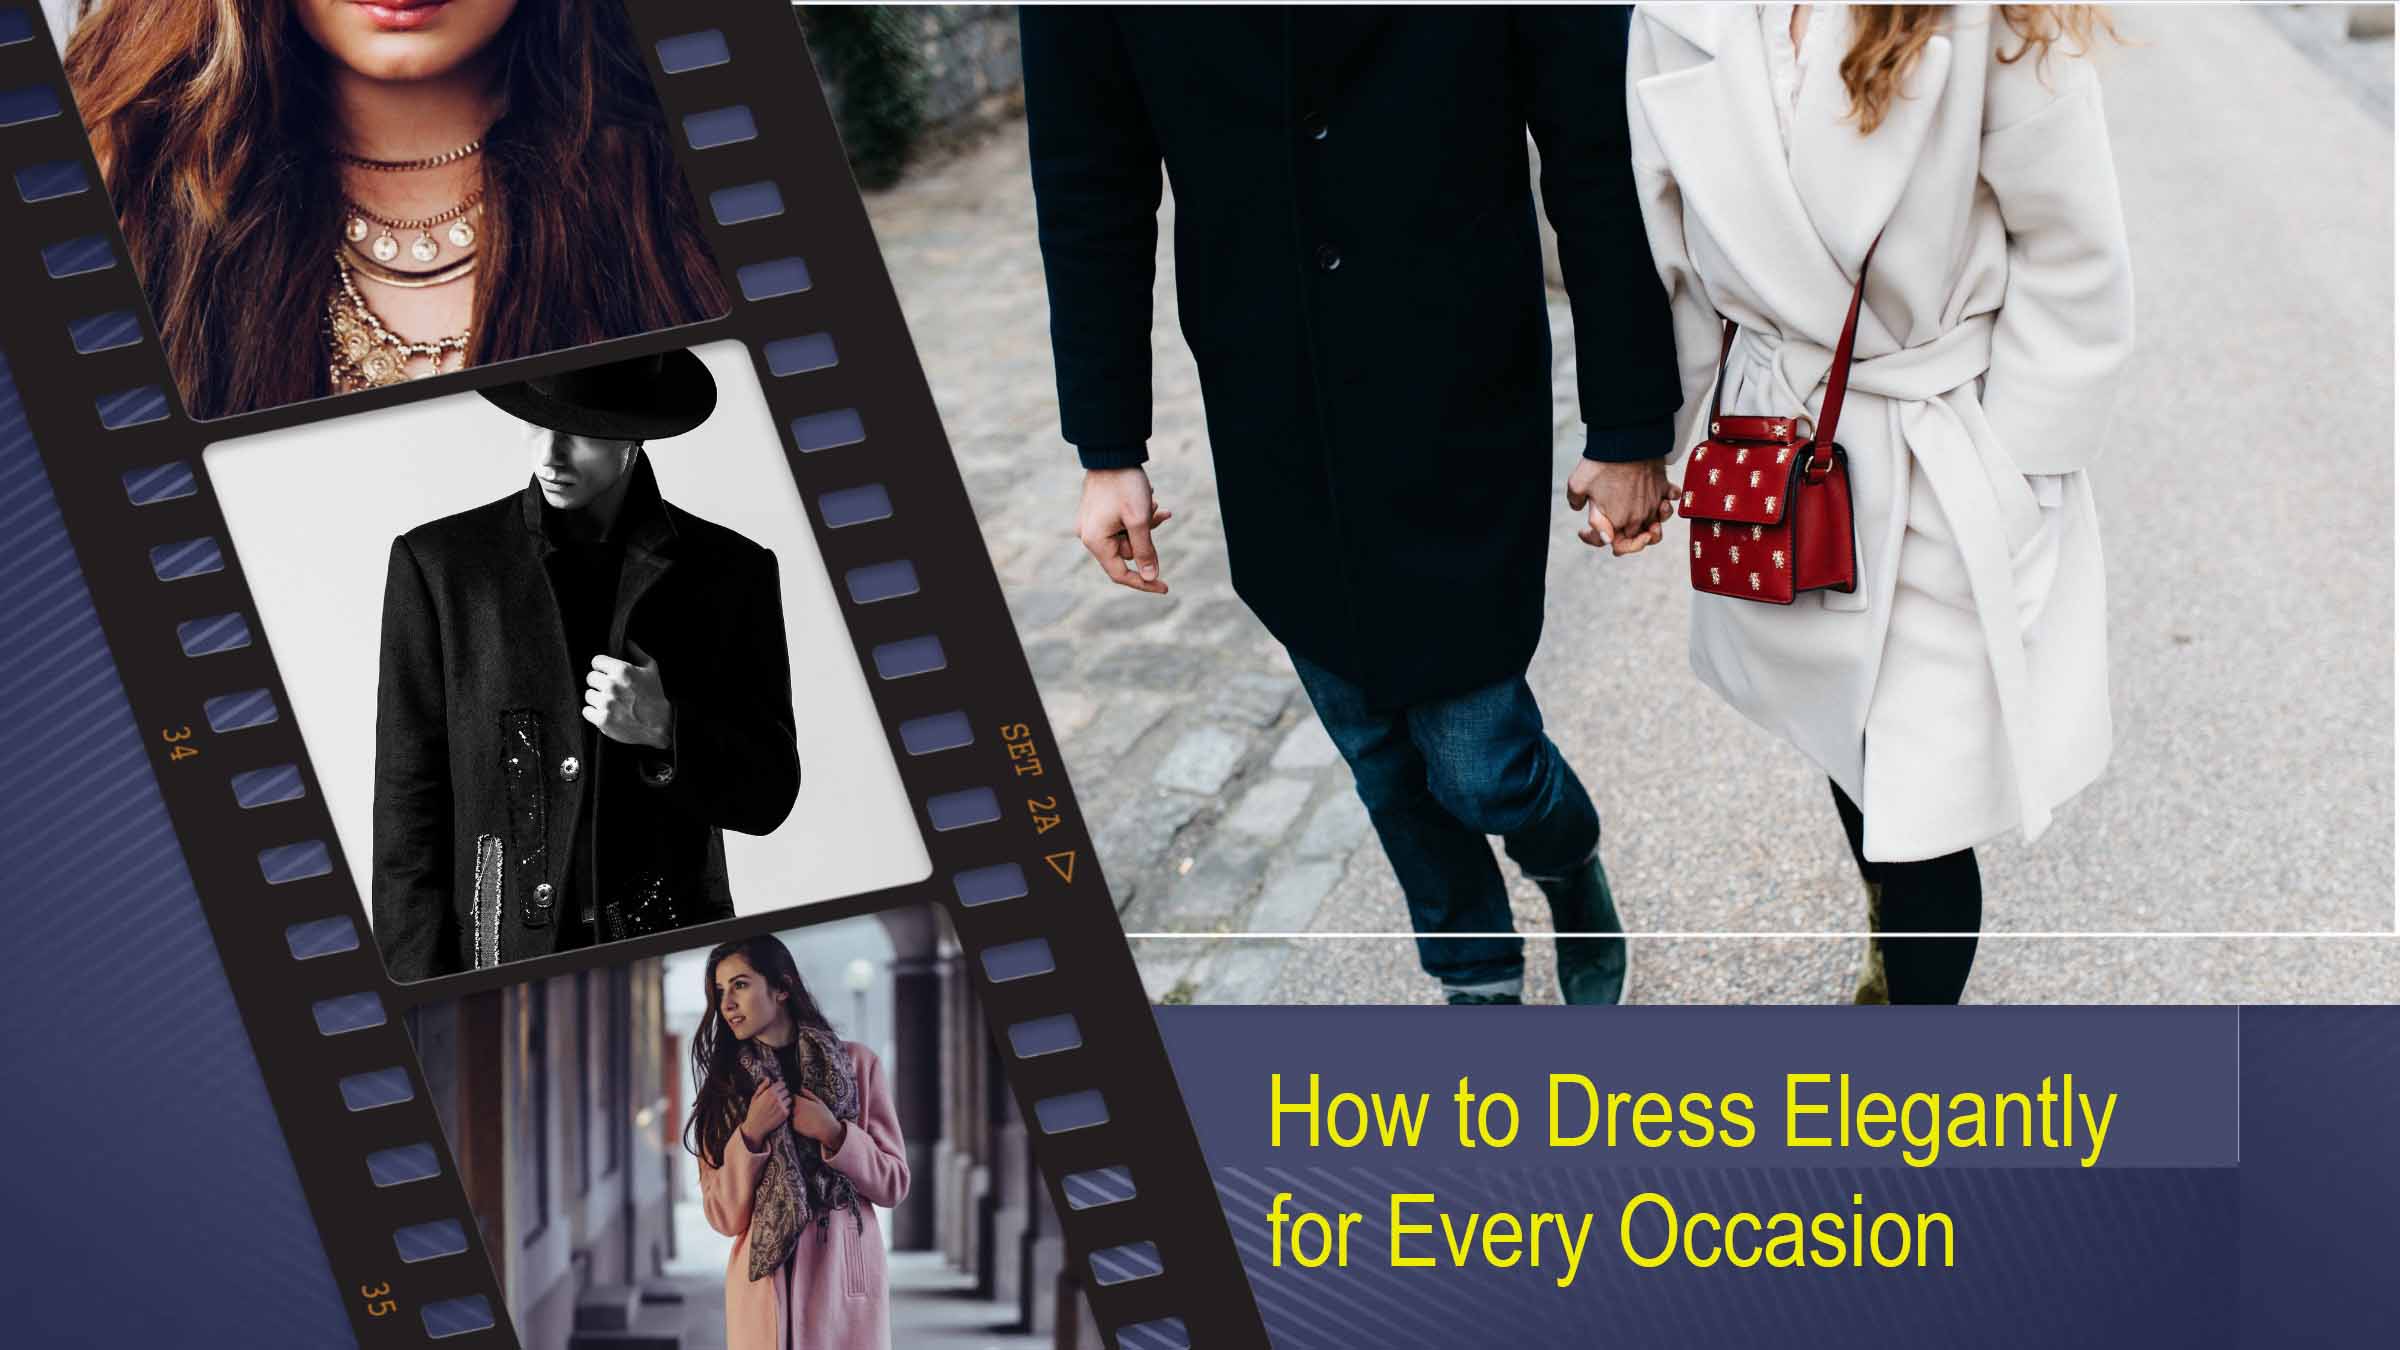 How to Dress Elegantly for Every Occasion